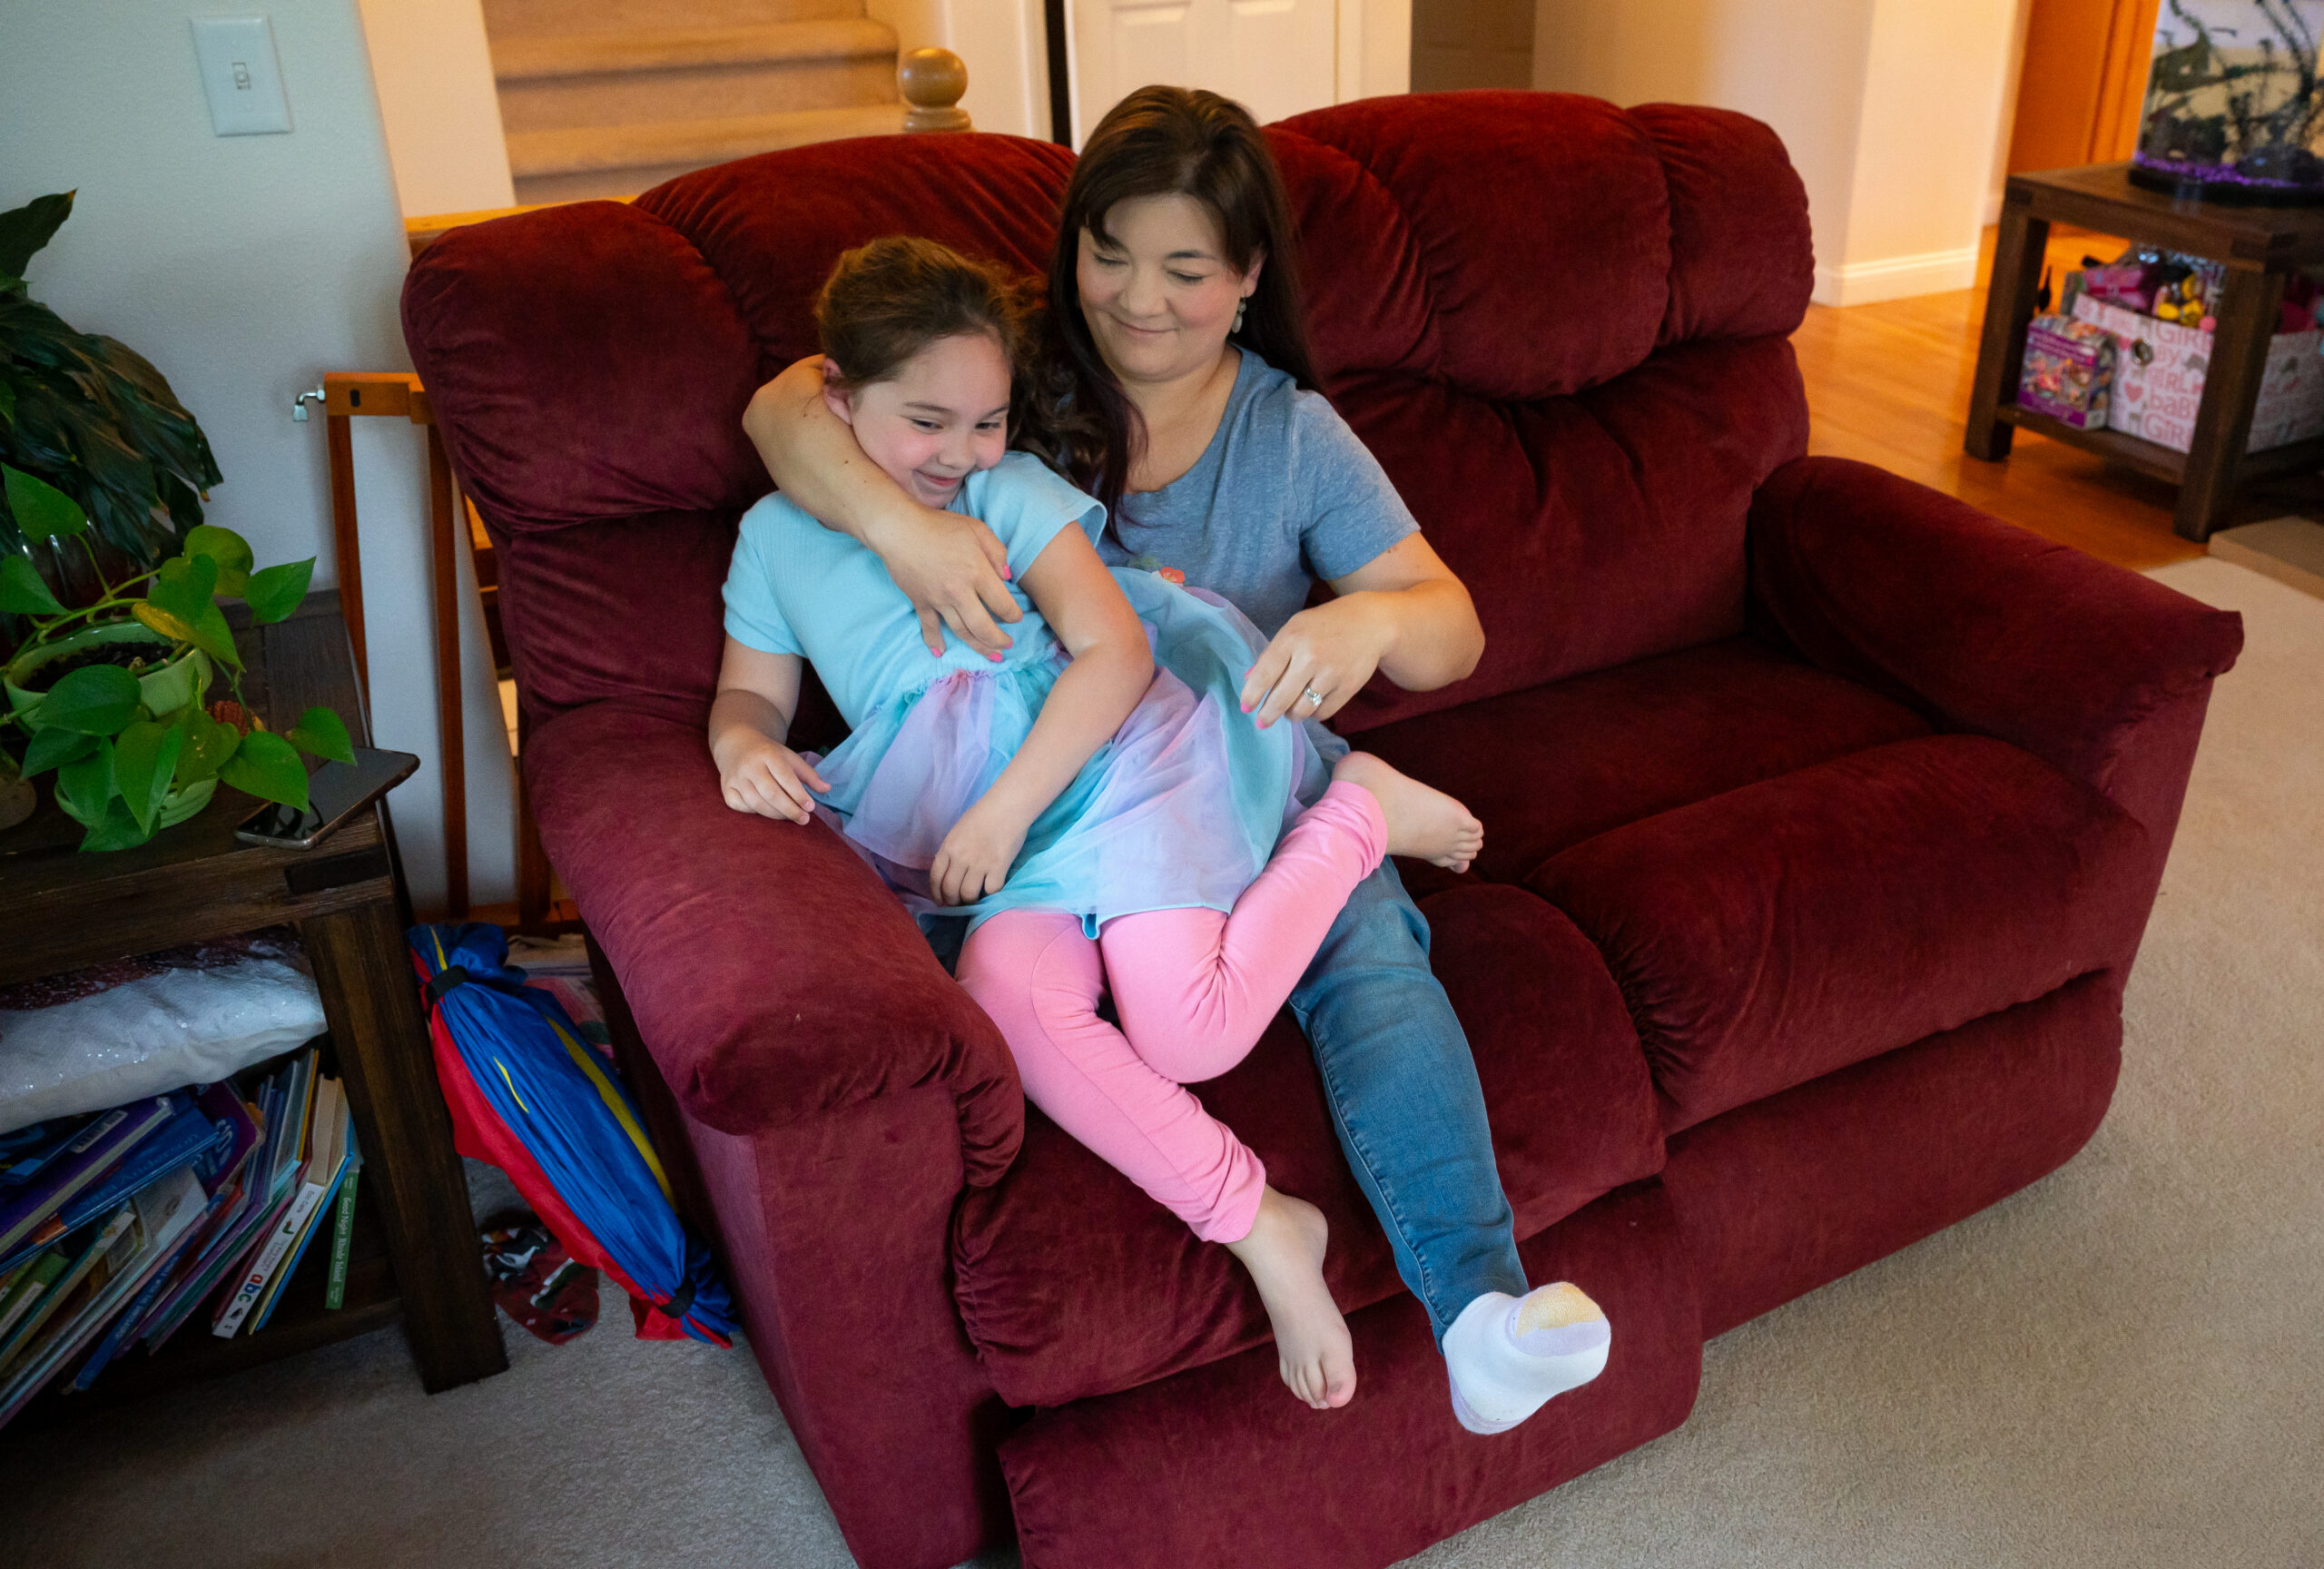 A woman plays with her daughter on a couch.